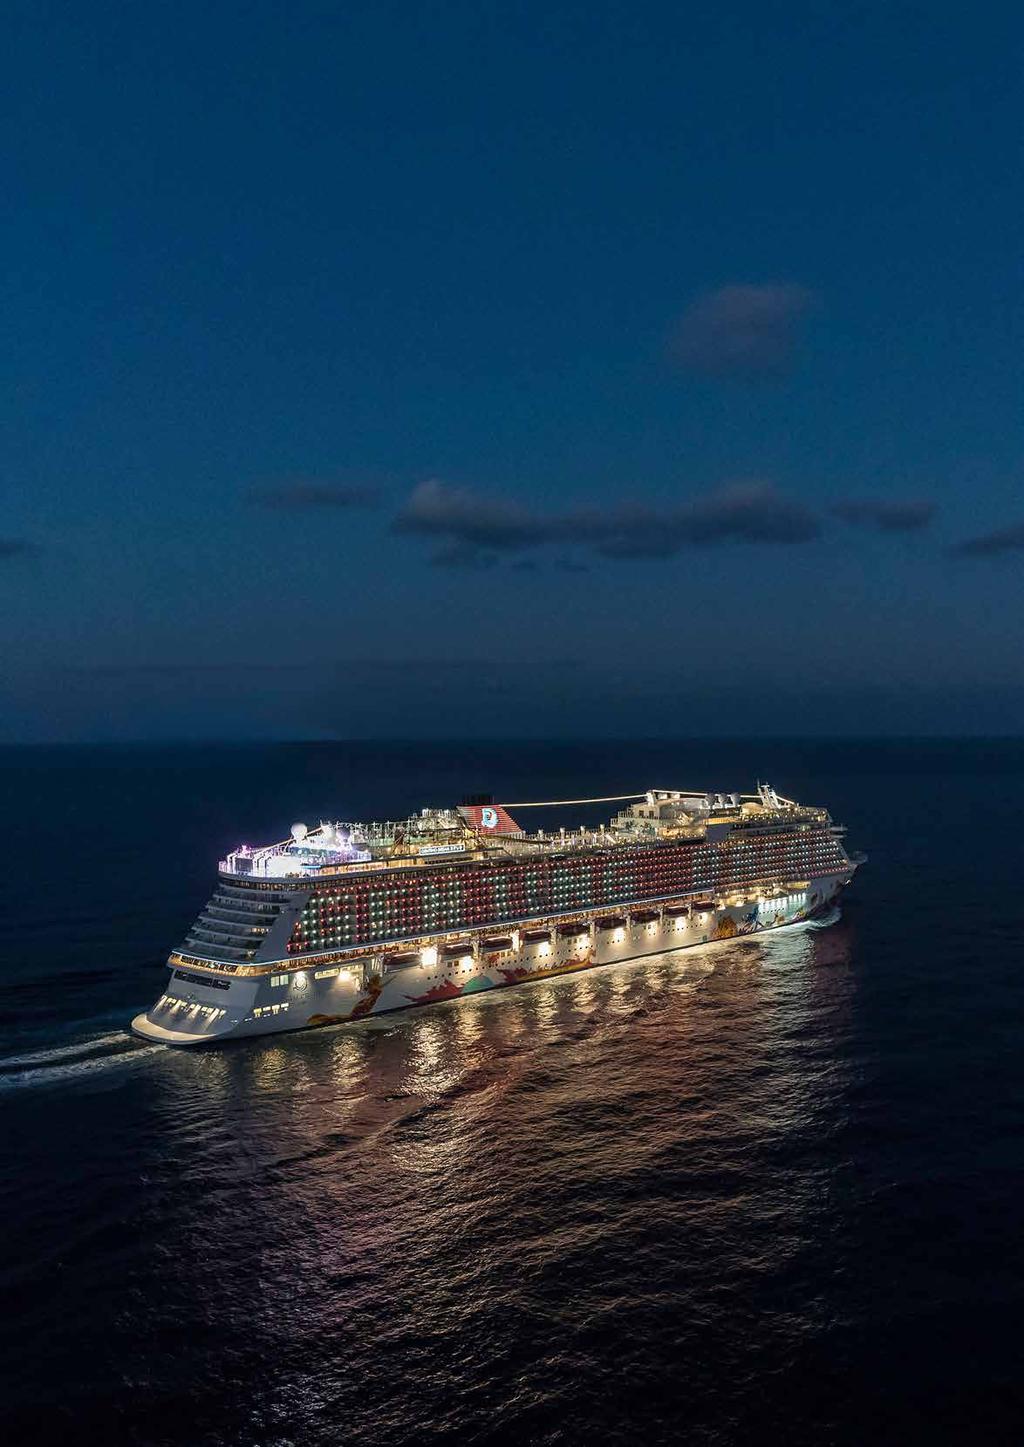 Genting Dream a vessel for your dream event. The advantages of having your event at sea are clear, but hosting it on Genting Dream makes it even more compelling.